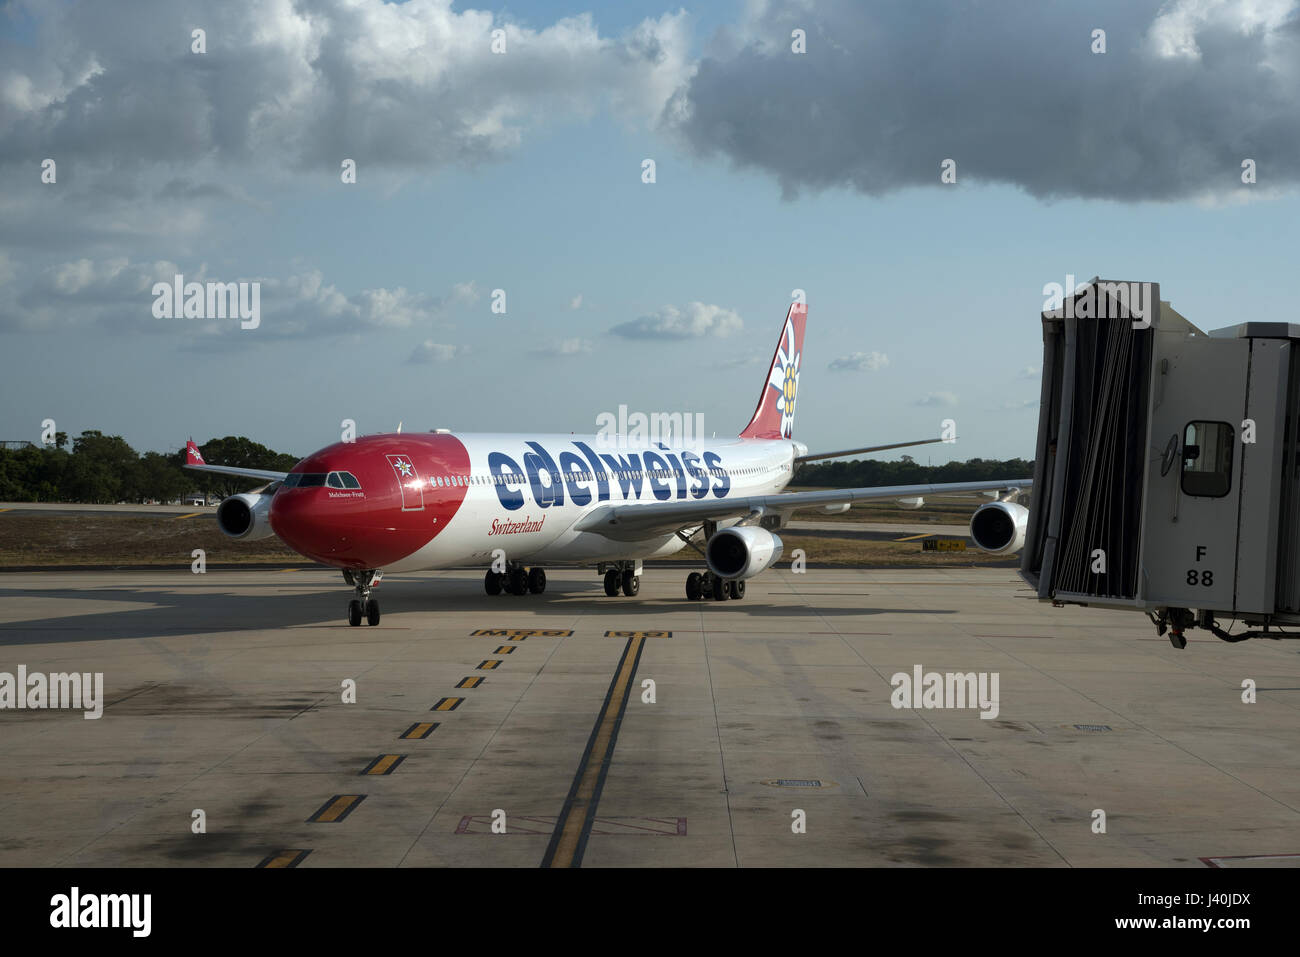 A Swiss A 340 Airbus passenger jet approaching a stand and jetway at Tampa International Airport Florida. May 2017. Stock Photo